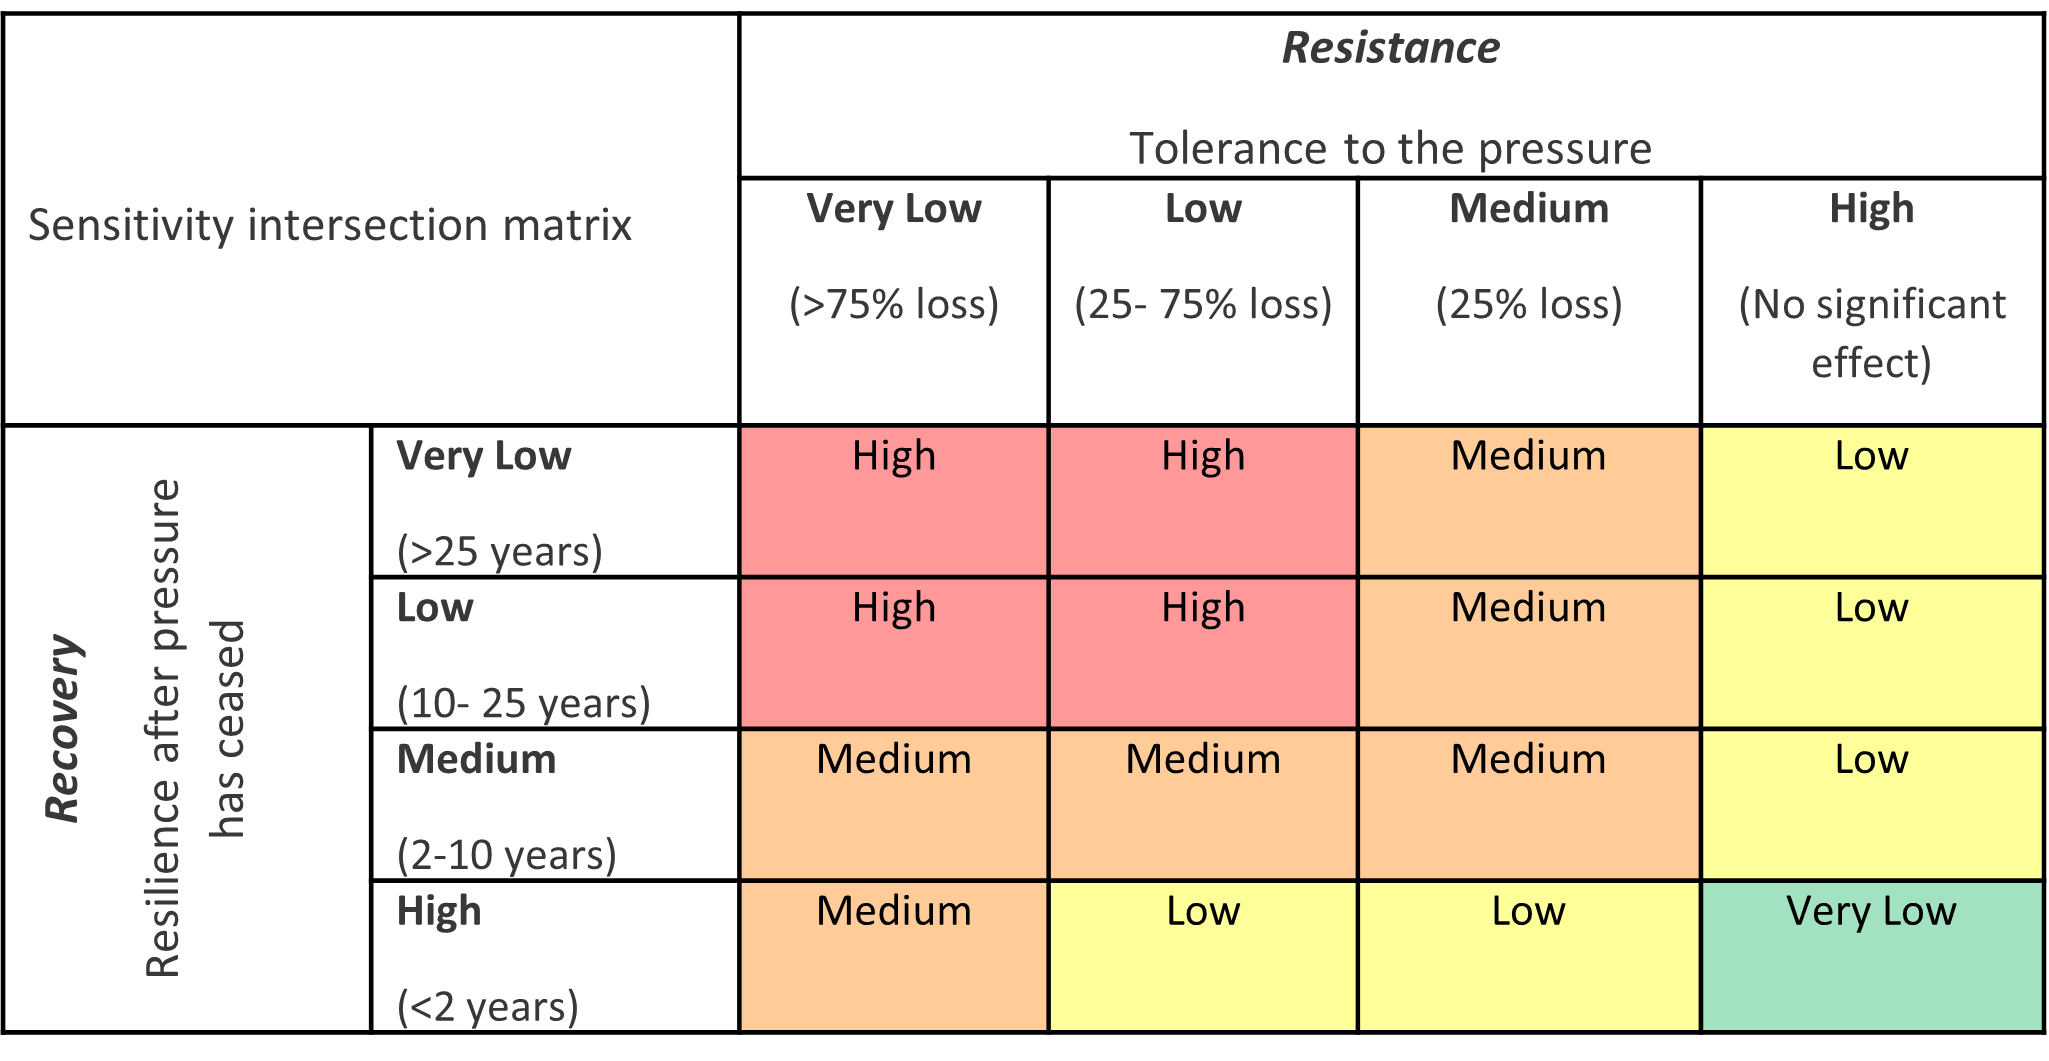 Sensitivity intersection matrix showing the relationship between resistance and recovery and the habitat score calculations.